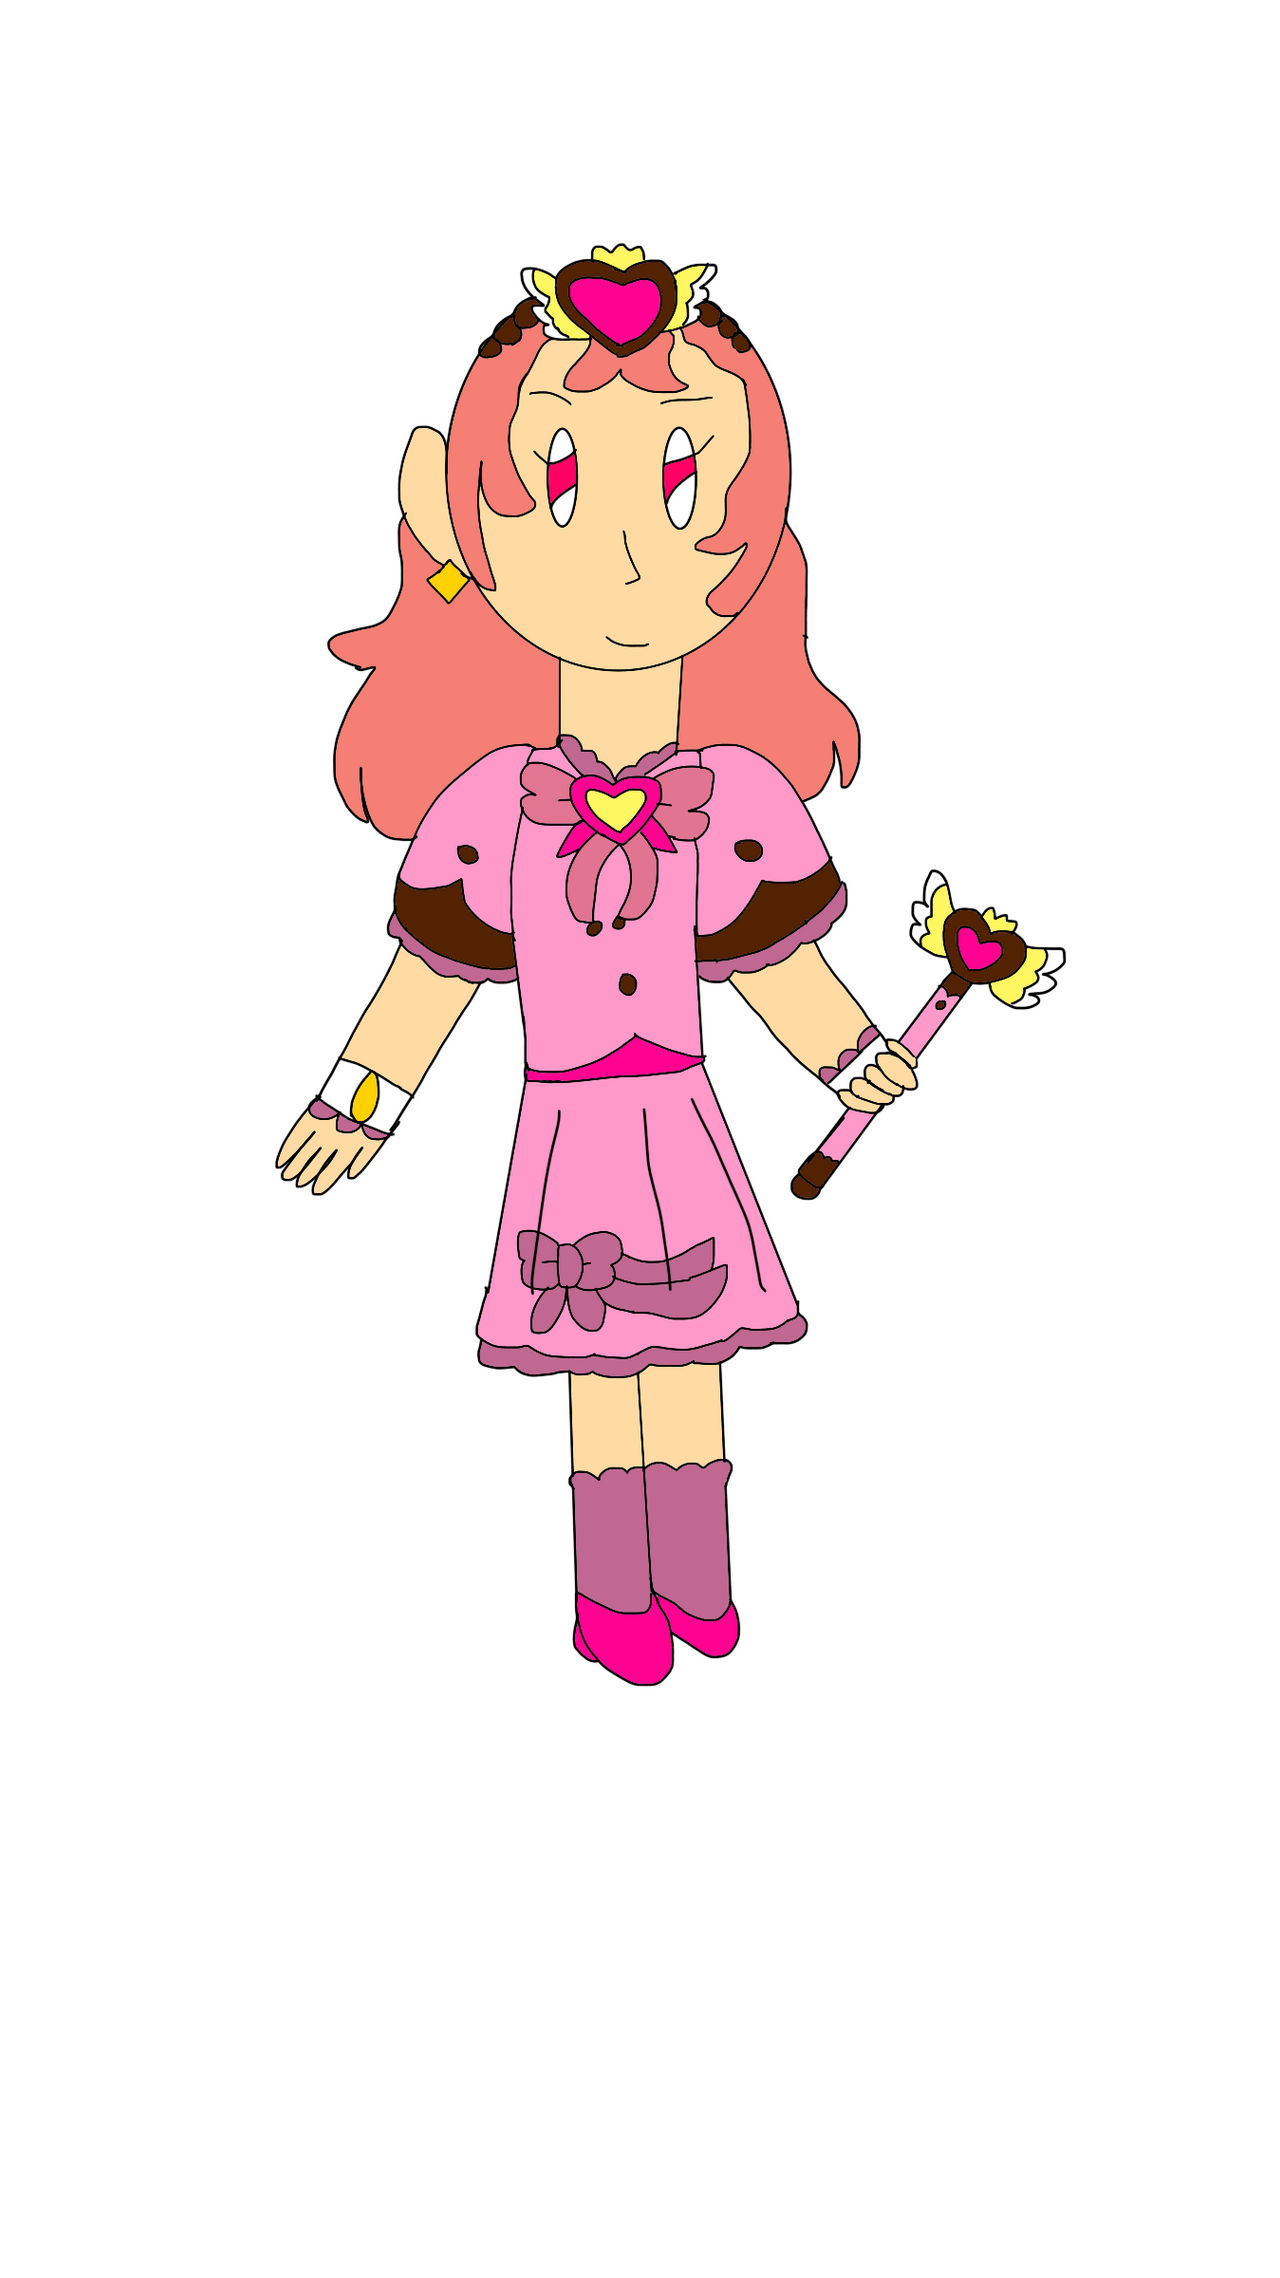 Magical Girl Marzipan by jlj16 on DeviantArt